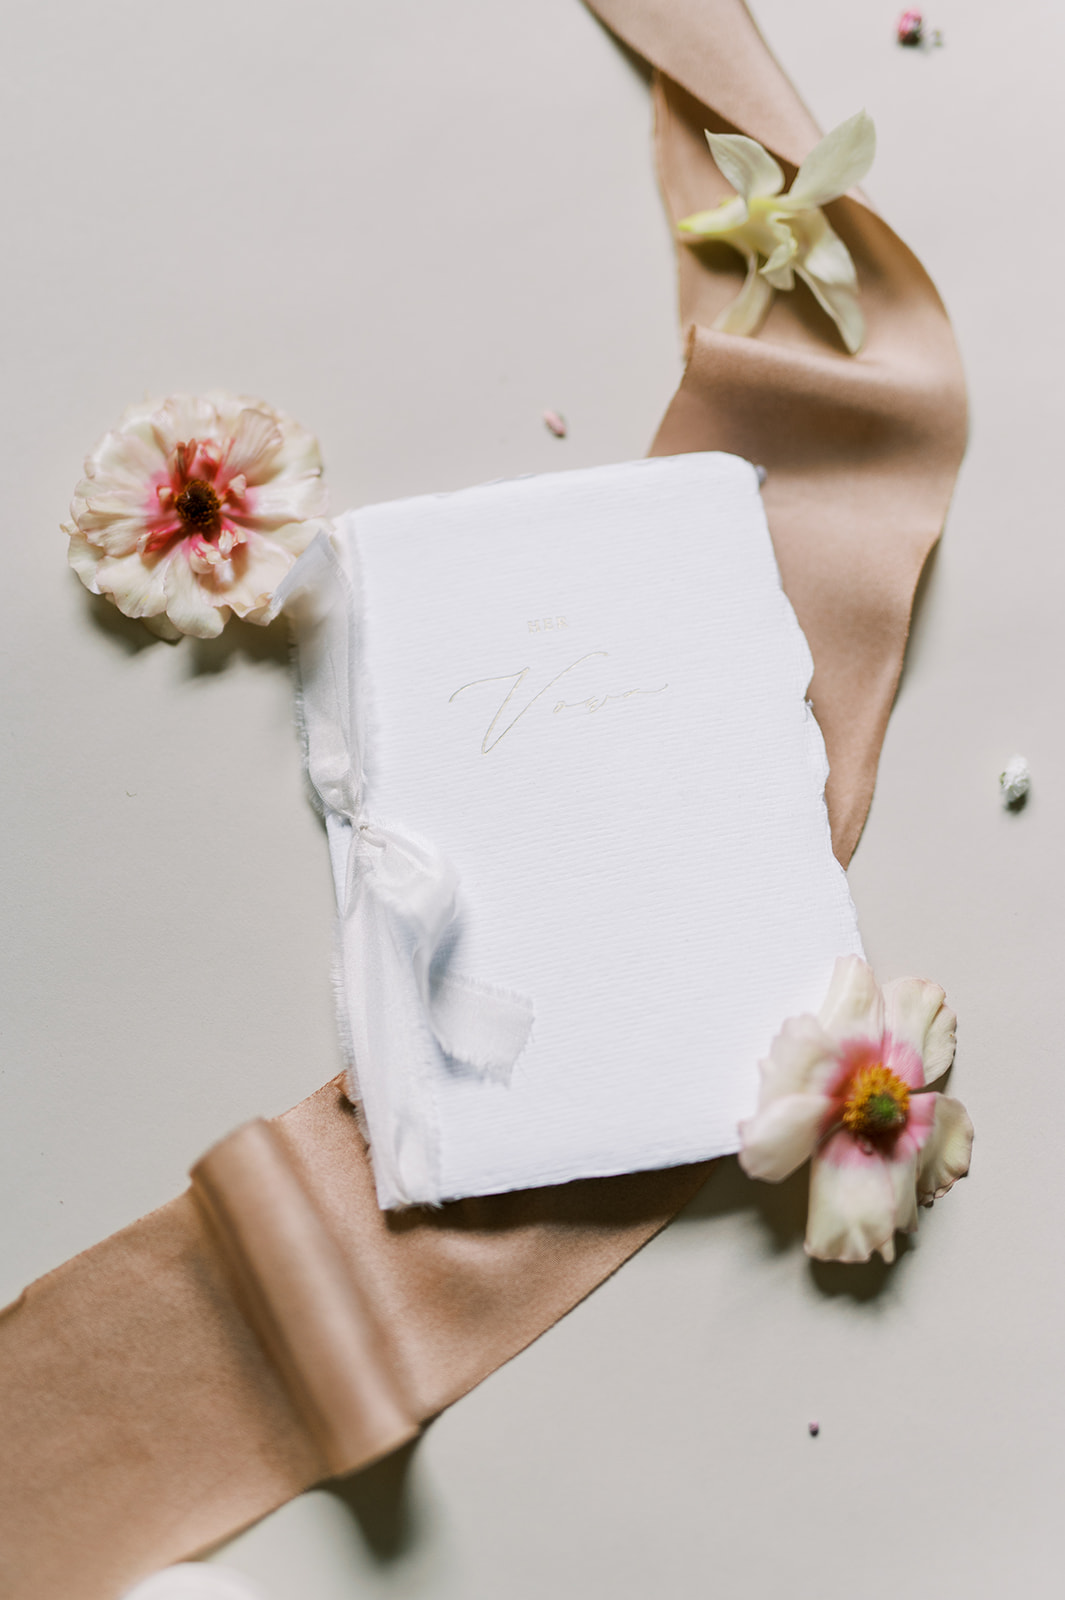 Custom-made vow book for bride with pink butterfly ranunculus flowers